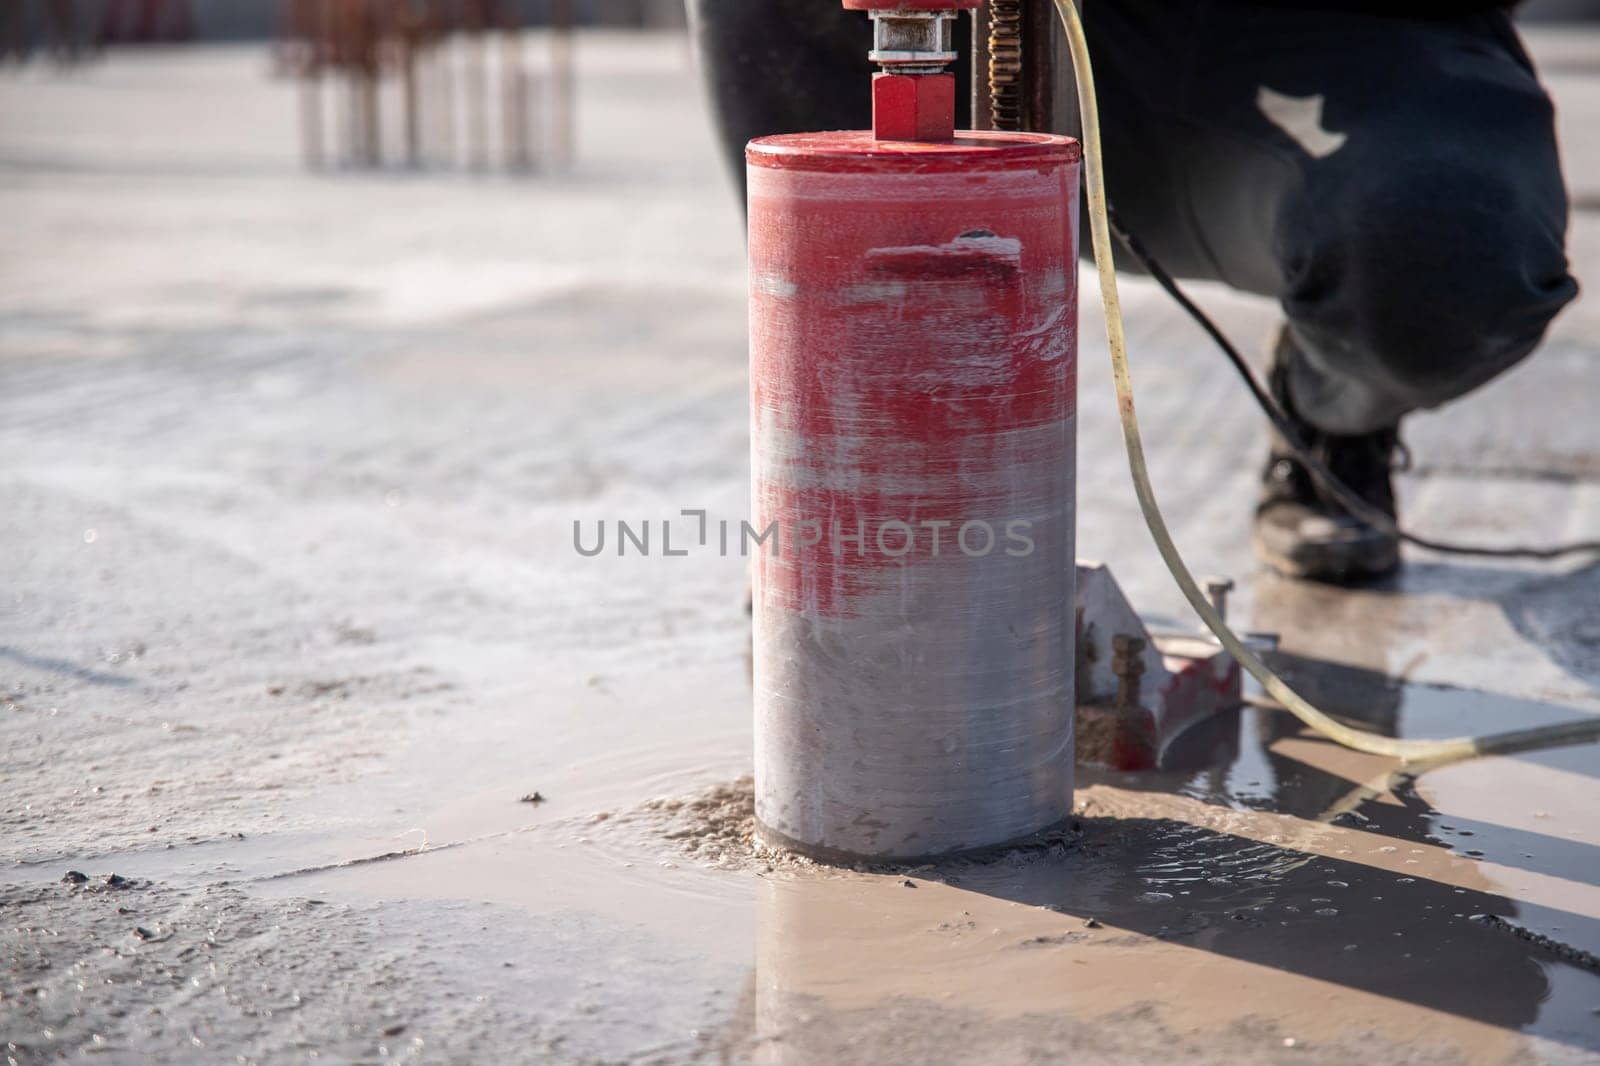 A worker drills a reinforced concrete floor using a drilling rig with a diamond bit by Rom4ek